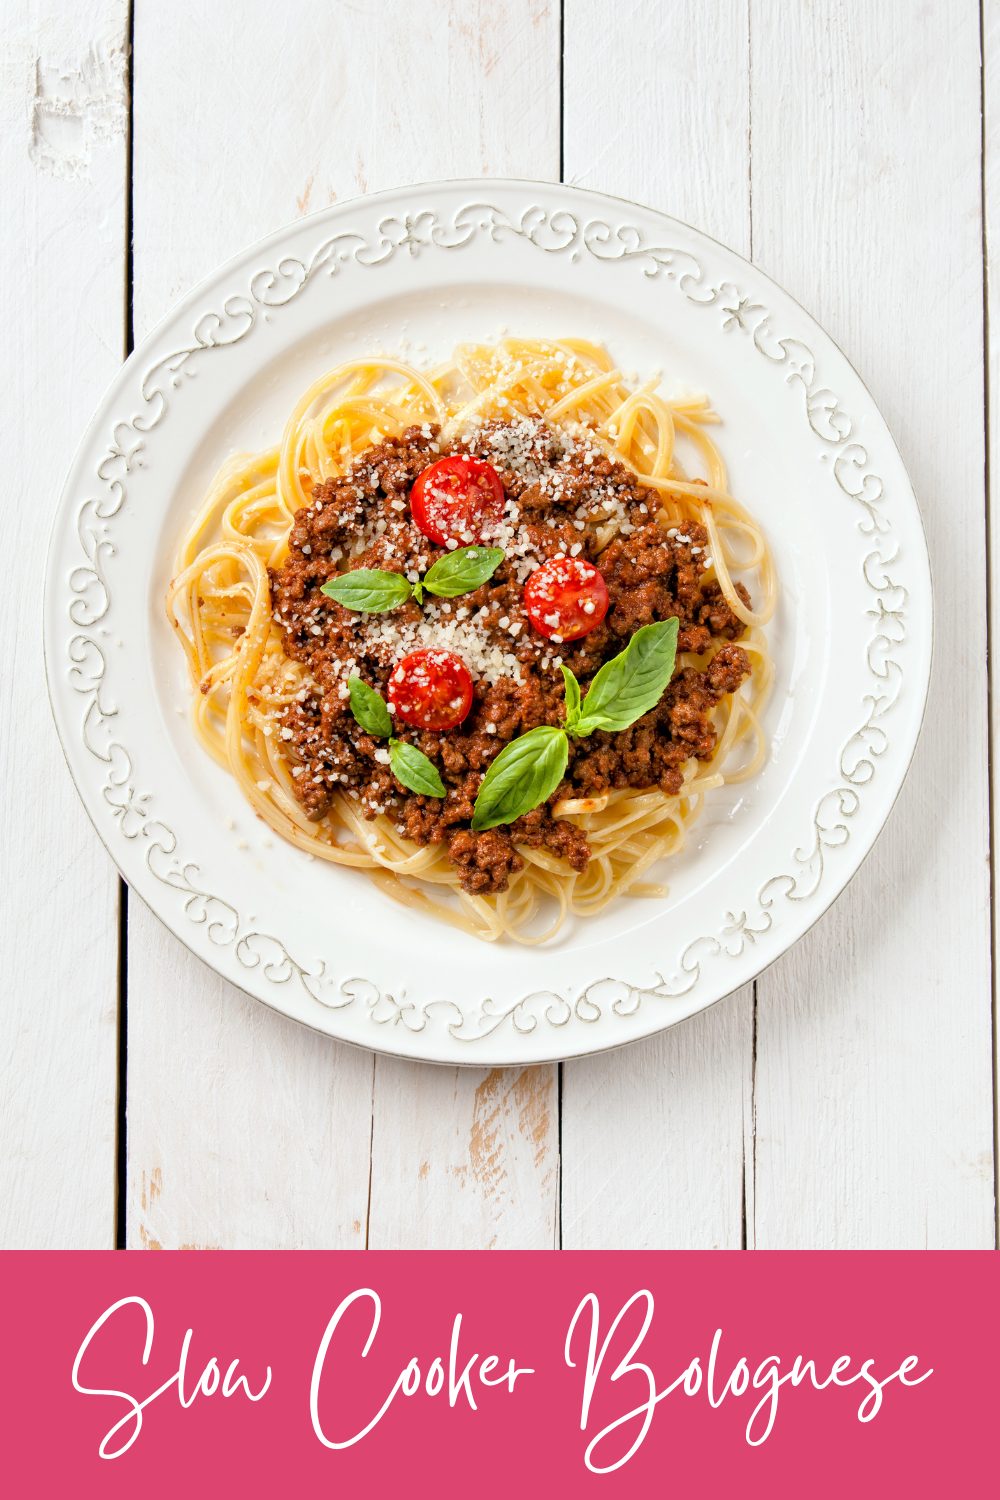 Slow cooker Bolognese, it's an easy and versatile dish. Pack it with veggies and serve it with whatever you like.